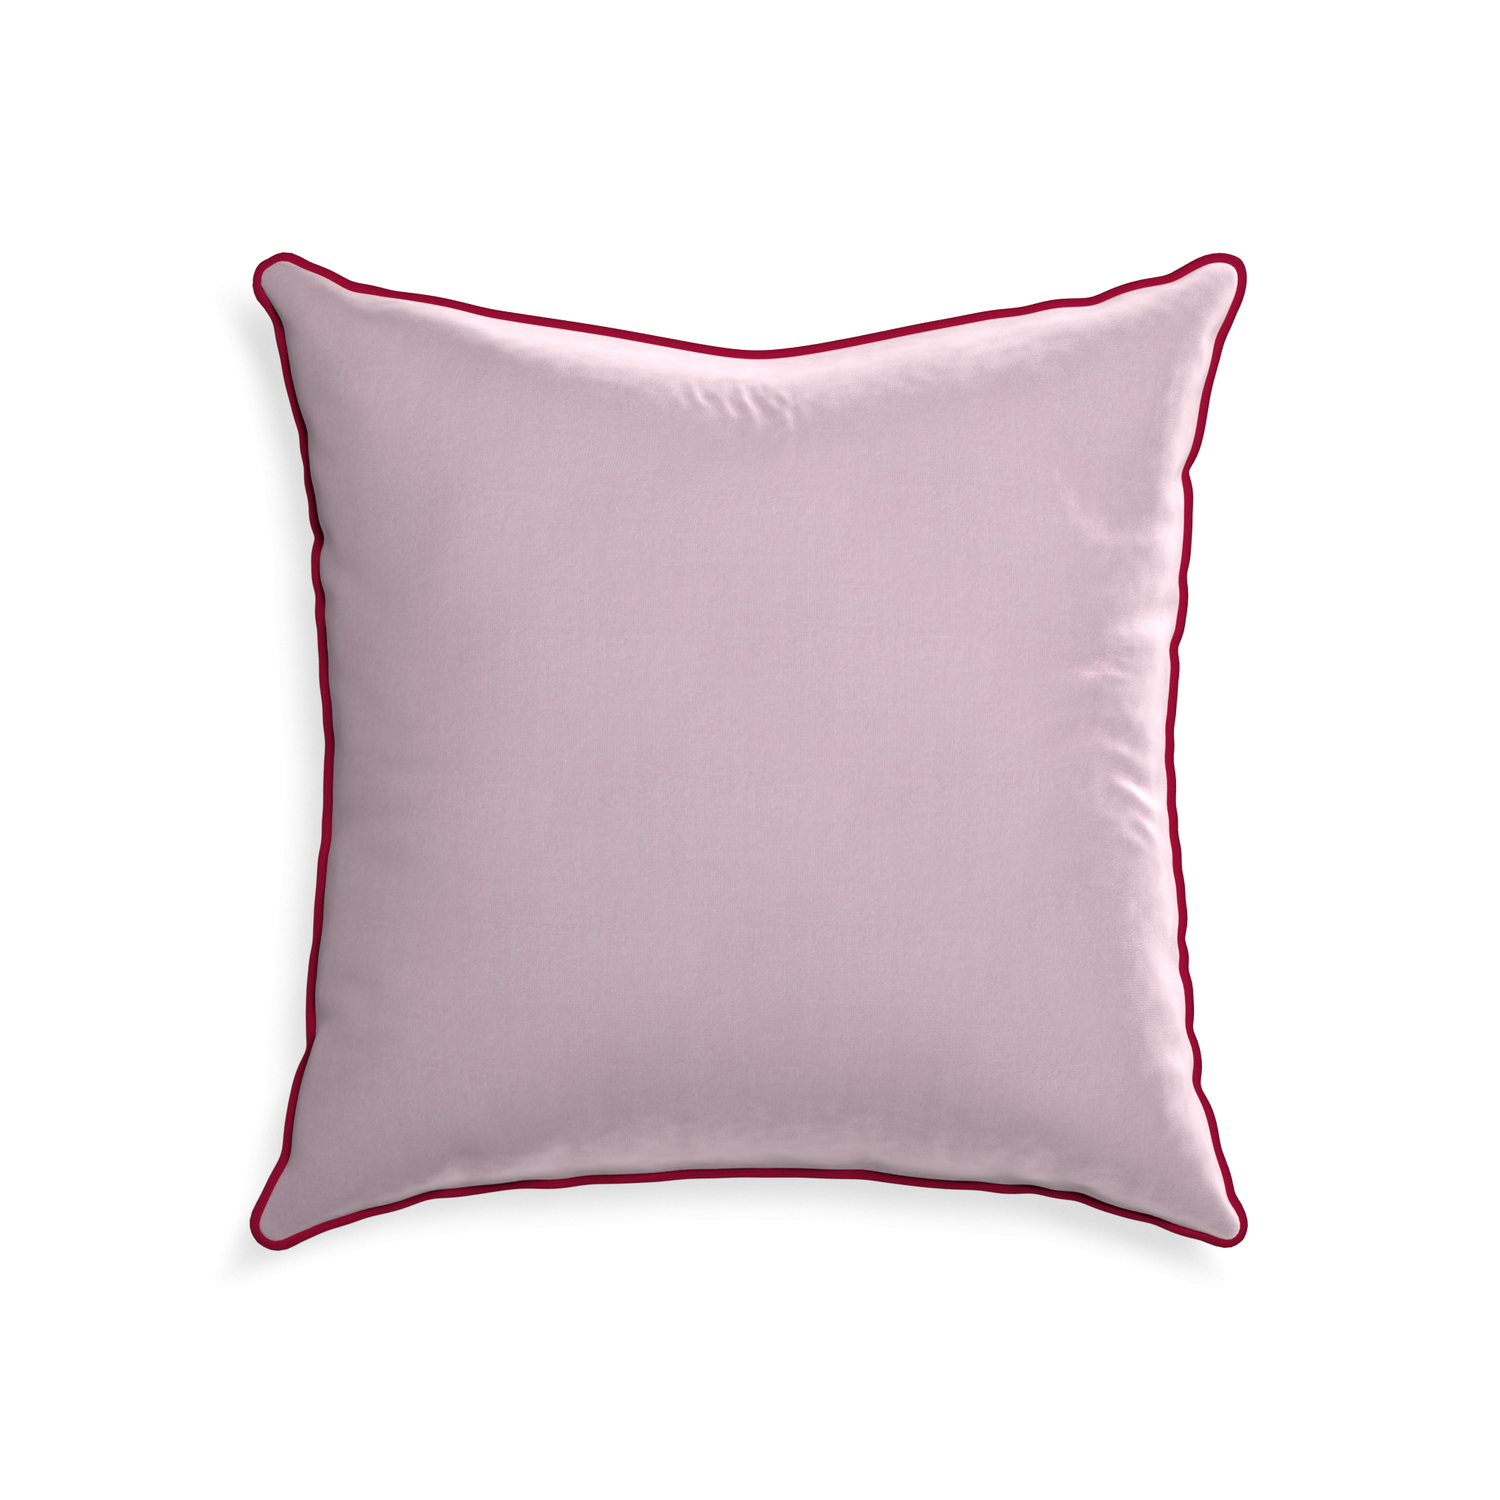 22-square lilac velvet custom pillow with raspberry piping on white background